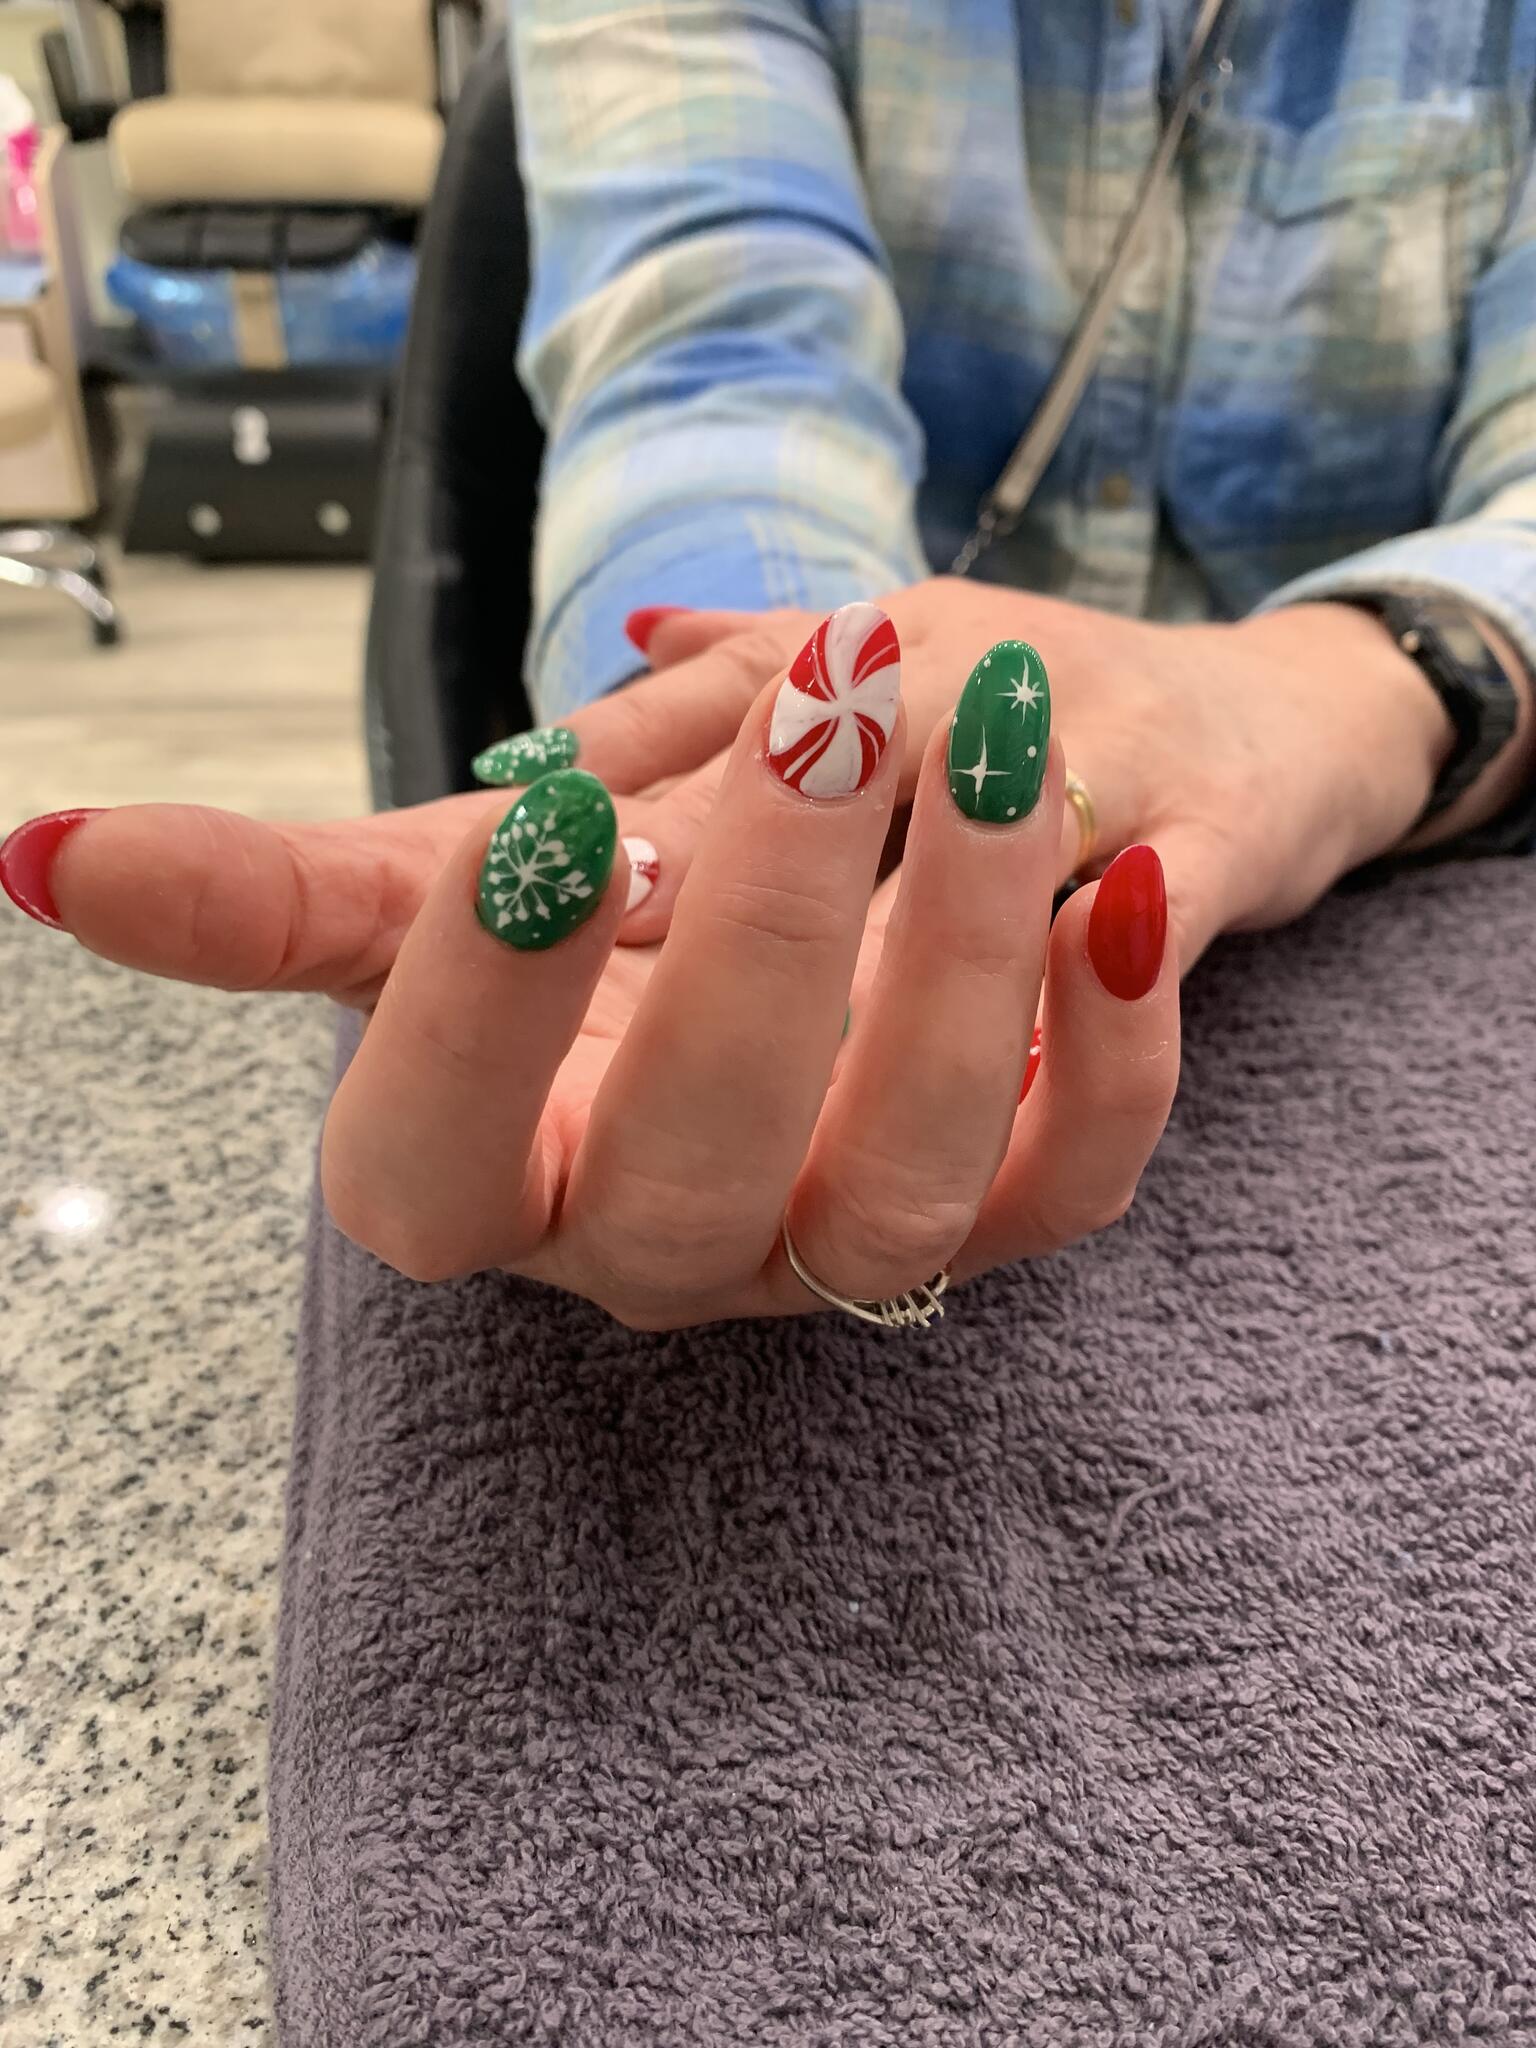 Best salons for nail art and nail designs in Houston | Fresha